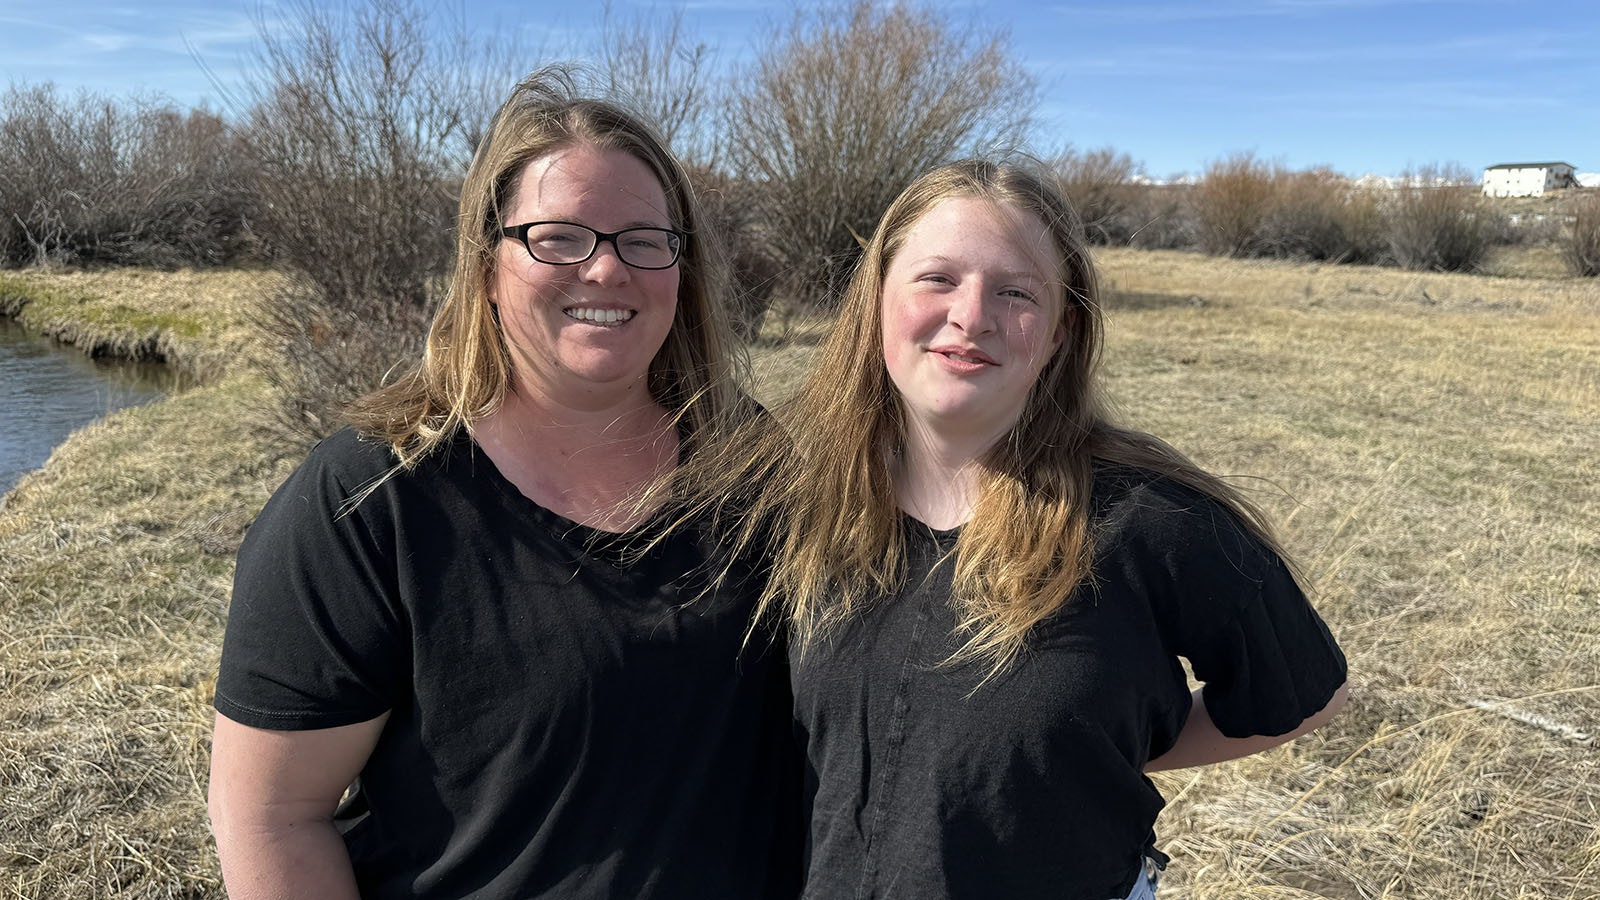 Emma McCarroll, a 13-year-old Girl Scout, right, and her mom, Erica Fairbanks McCarroll, got into hot water with Pinedale for selling Girl Scout cookies along the town’s main thoroughfare, Pine Avenue.